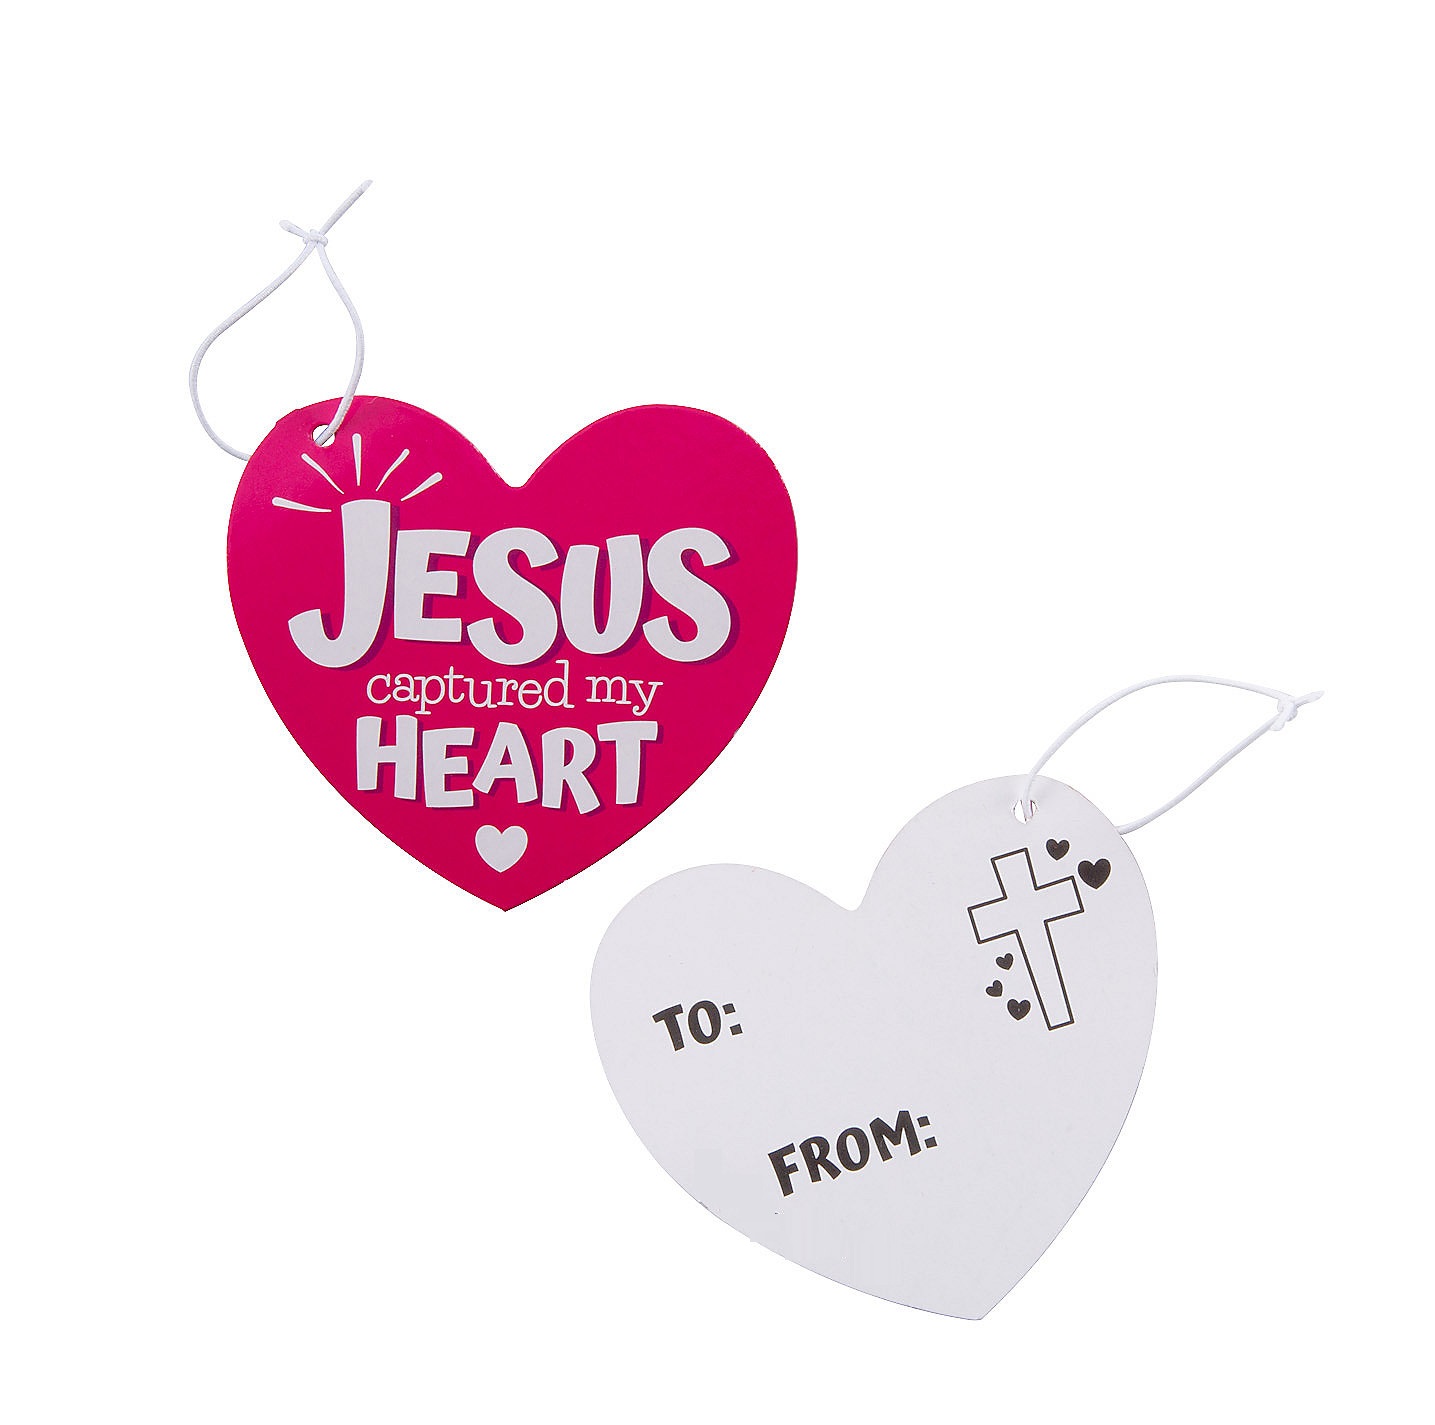 religious-heart-stuffed-dog-valentine-exchanges-with-card-for-12_14115110-a01